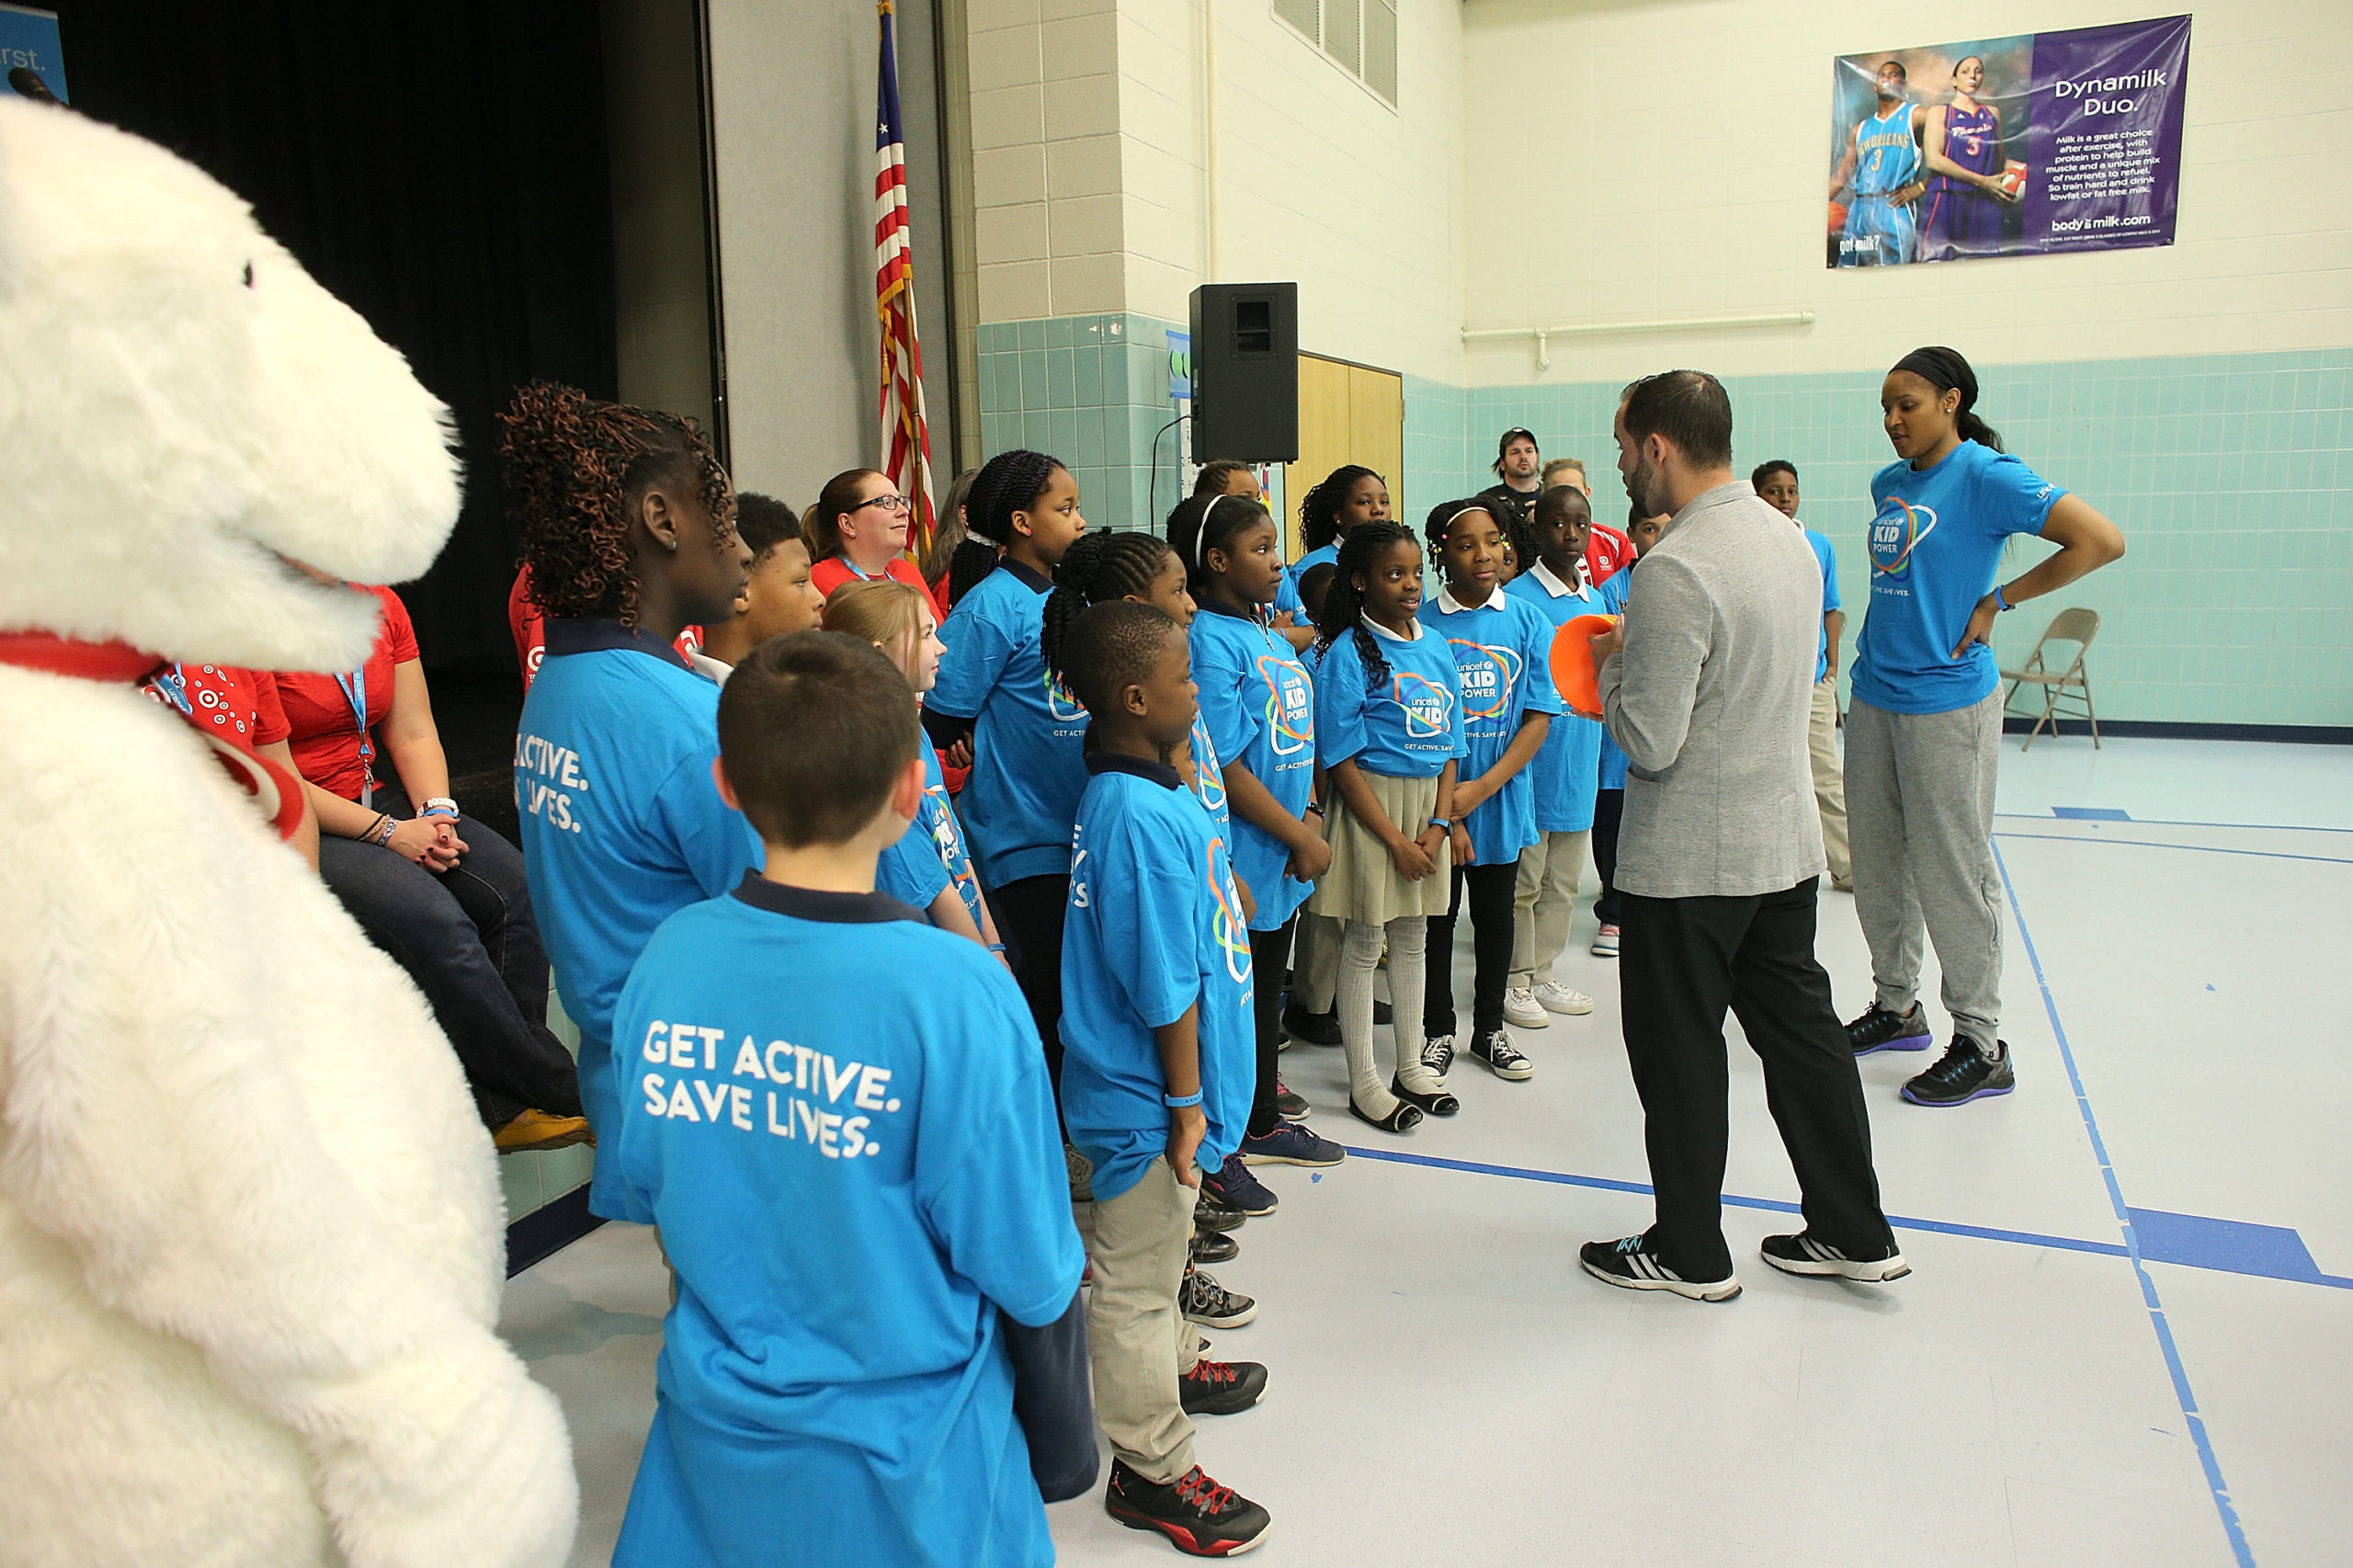 A general view of UNICEF Kid Power Twin Cities Celebration at Odyssey Charter School on April 6, 2016 in Brooklyn Center, Minnesota. (Photo by Adam Bettcher/Getty Images for UNICEF)